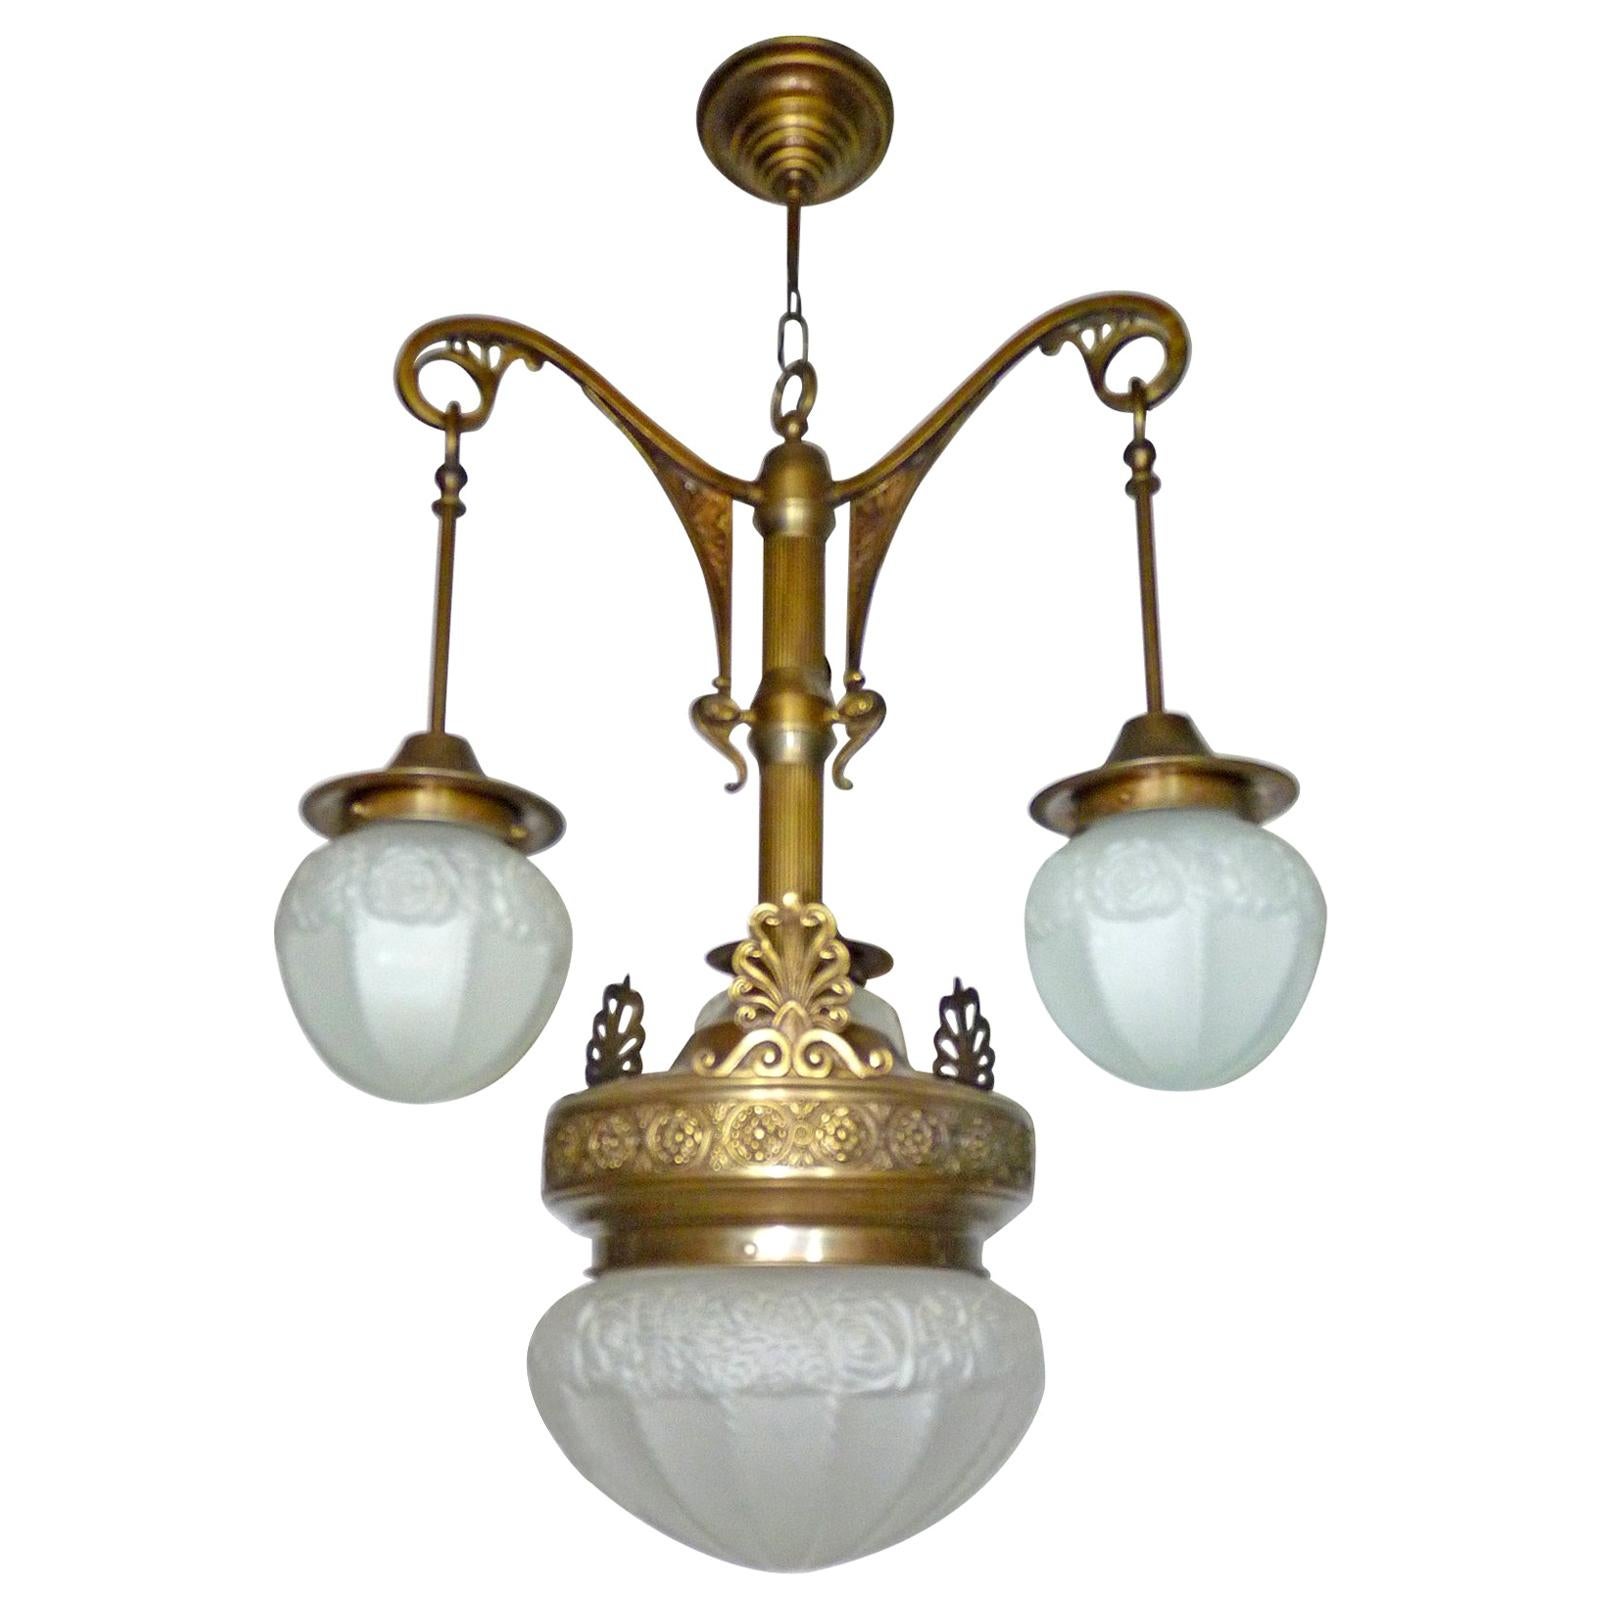 French Degué style Art Deco white frosted glass, 4-light chandelier/ brass
4 light bulbs (3 bulbs E14 40W + one bulb E27 60W)
Good working condition / European wiring
Measures:
Diameter 23.6 in / 60 cm
Height 35.4 in / 90 cm
Glass shades: 6 in